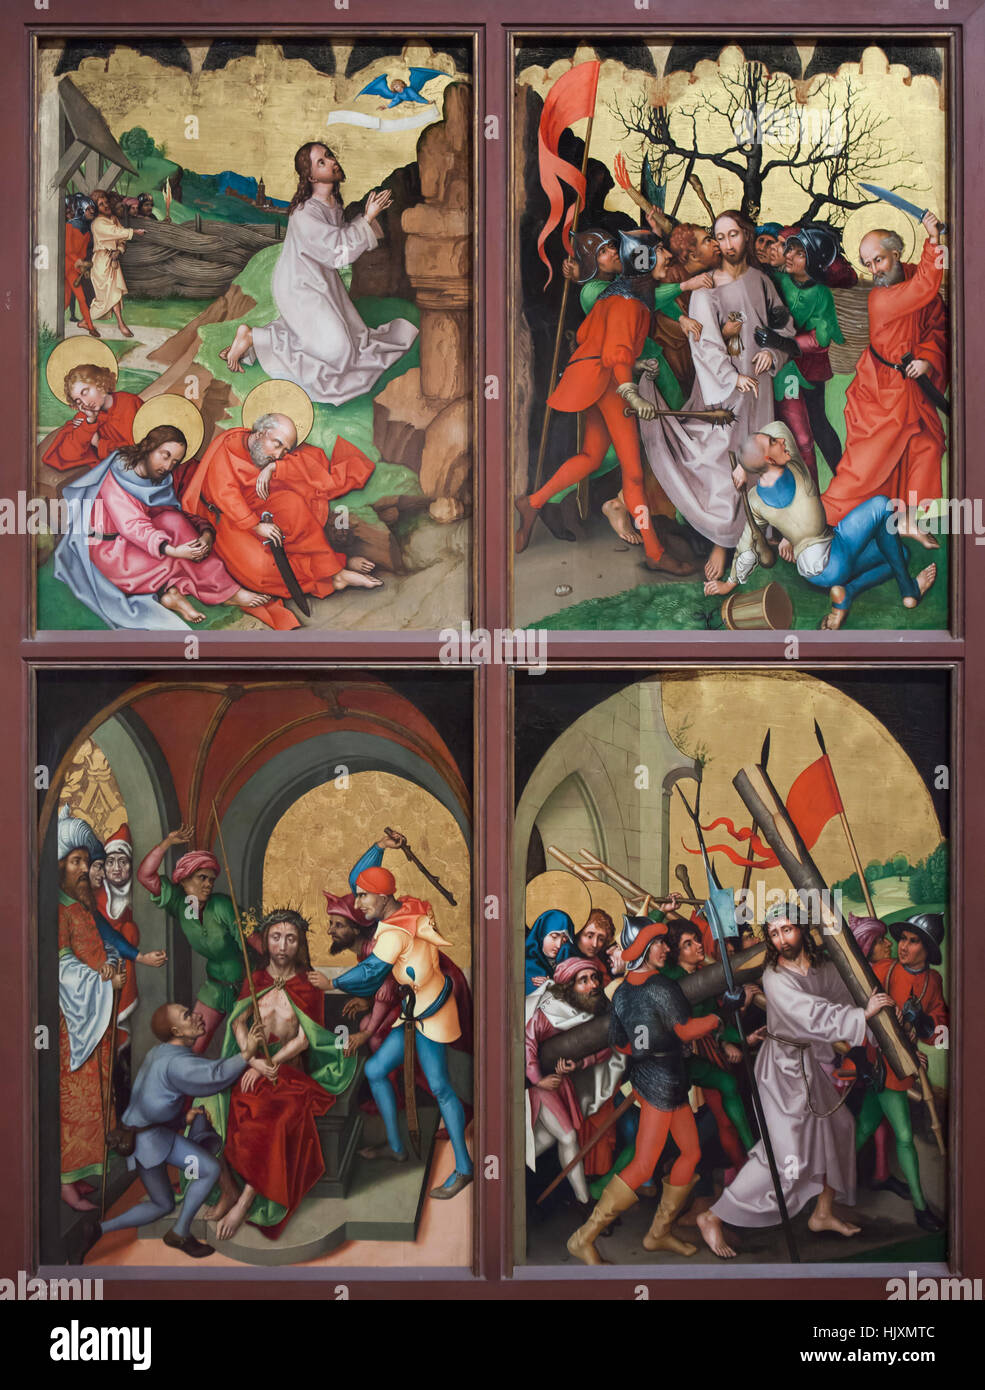 Wing of the altarpiece from circa 1480 by German Renaissance painter Martin Schongauer from the Dominican Church in Colmar on display in the Musee d'Unterlinden (Unterlinden Museum) in Colmar, Alsace, France. Depicted scenes (from left to right from top to bottom): Agony in the Garden, Kiss of Judas Iscariot, Mocking of Christ and Christ carrying the cross. Stock Photo